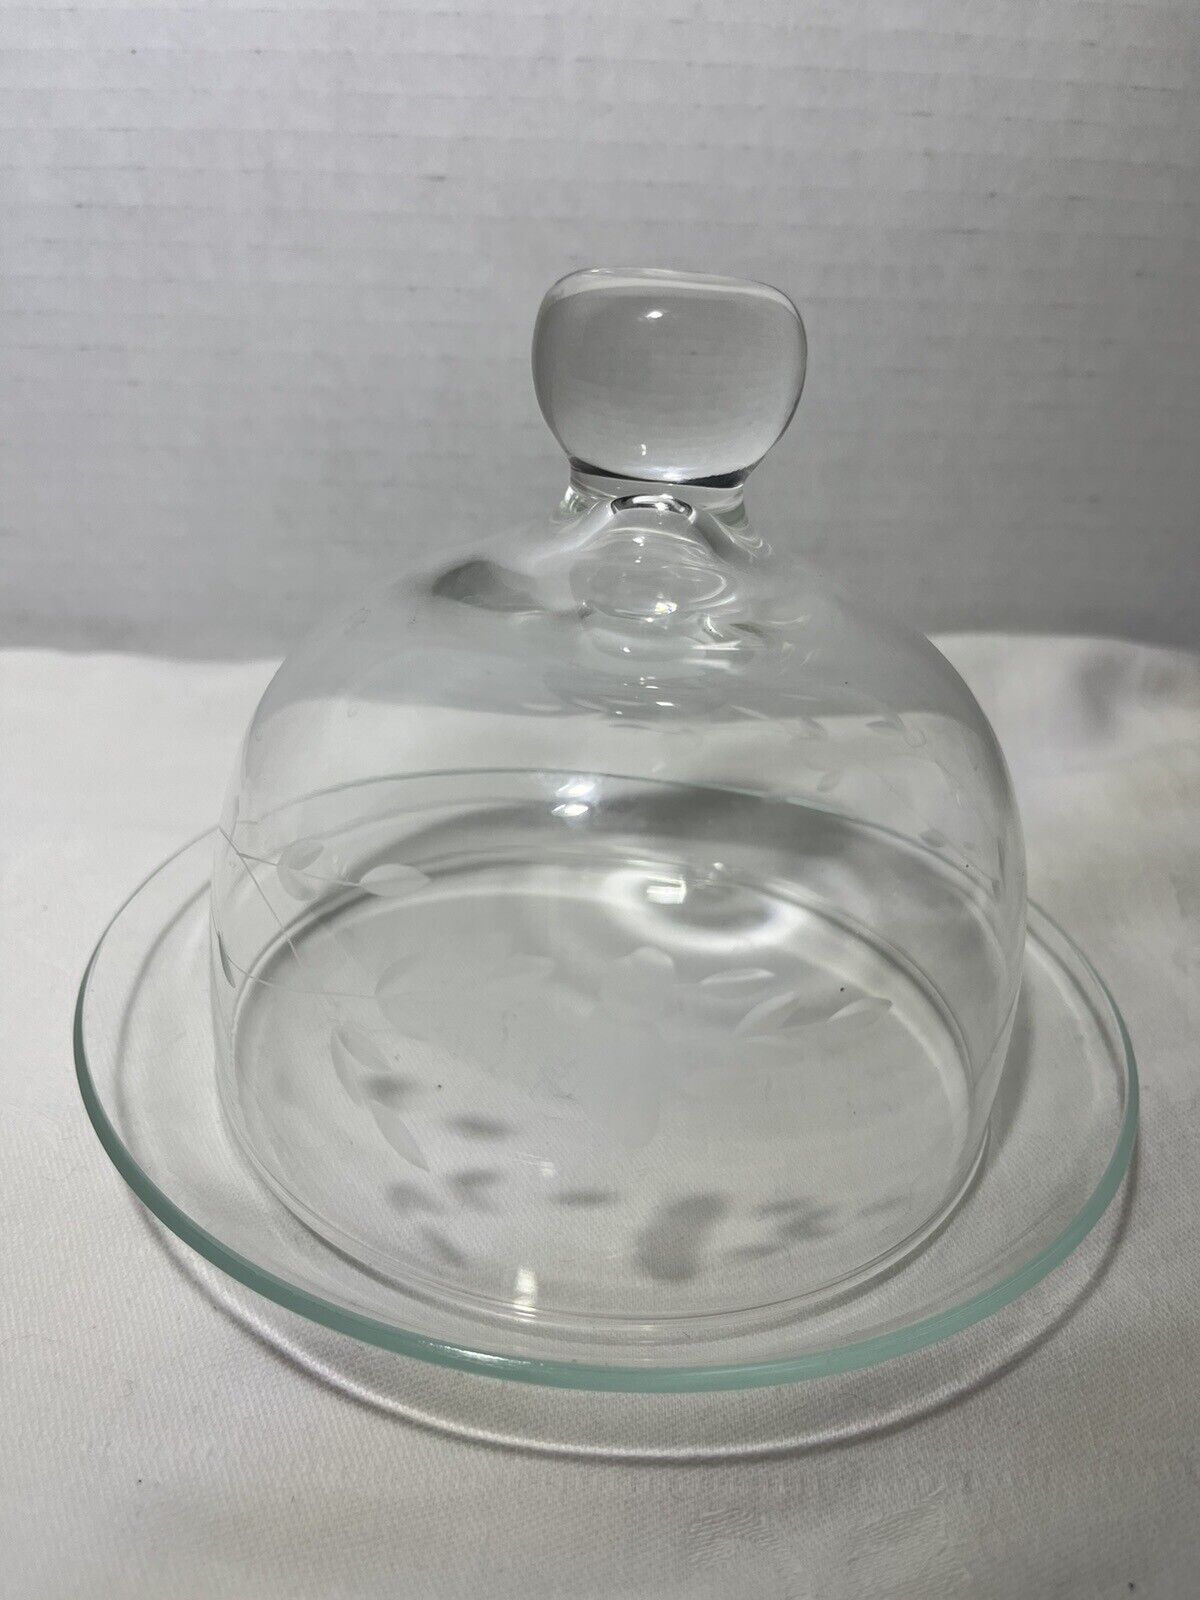 Princess House Heritage Round Covered Butter Dish Or Cheese Ball Plate & Lid